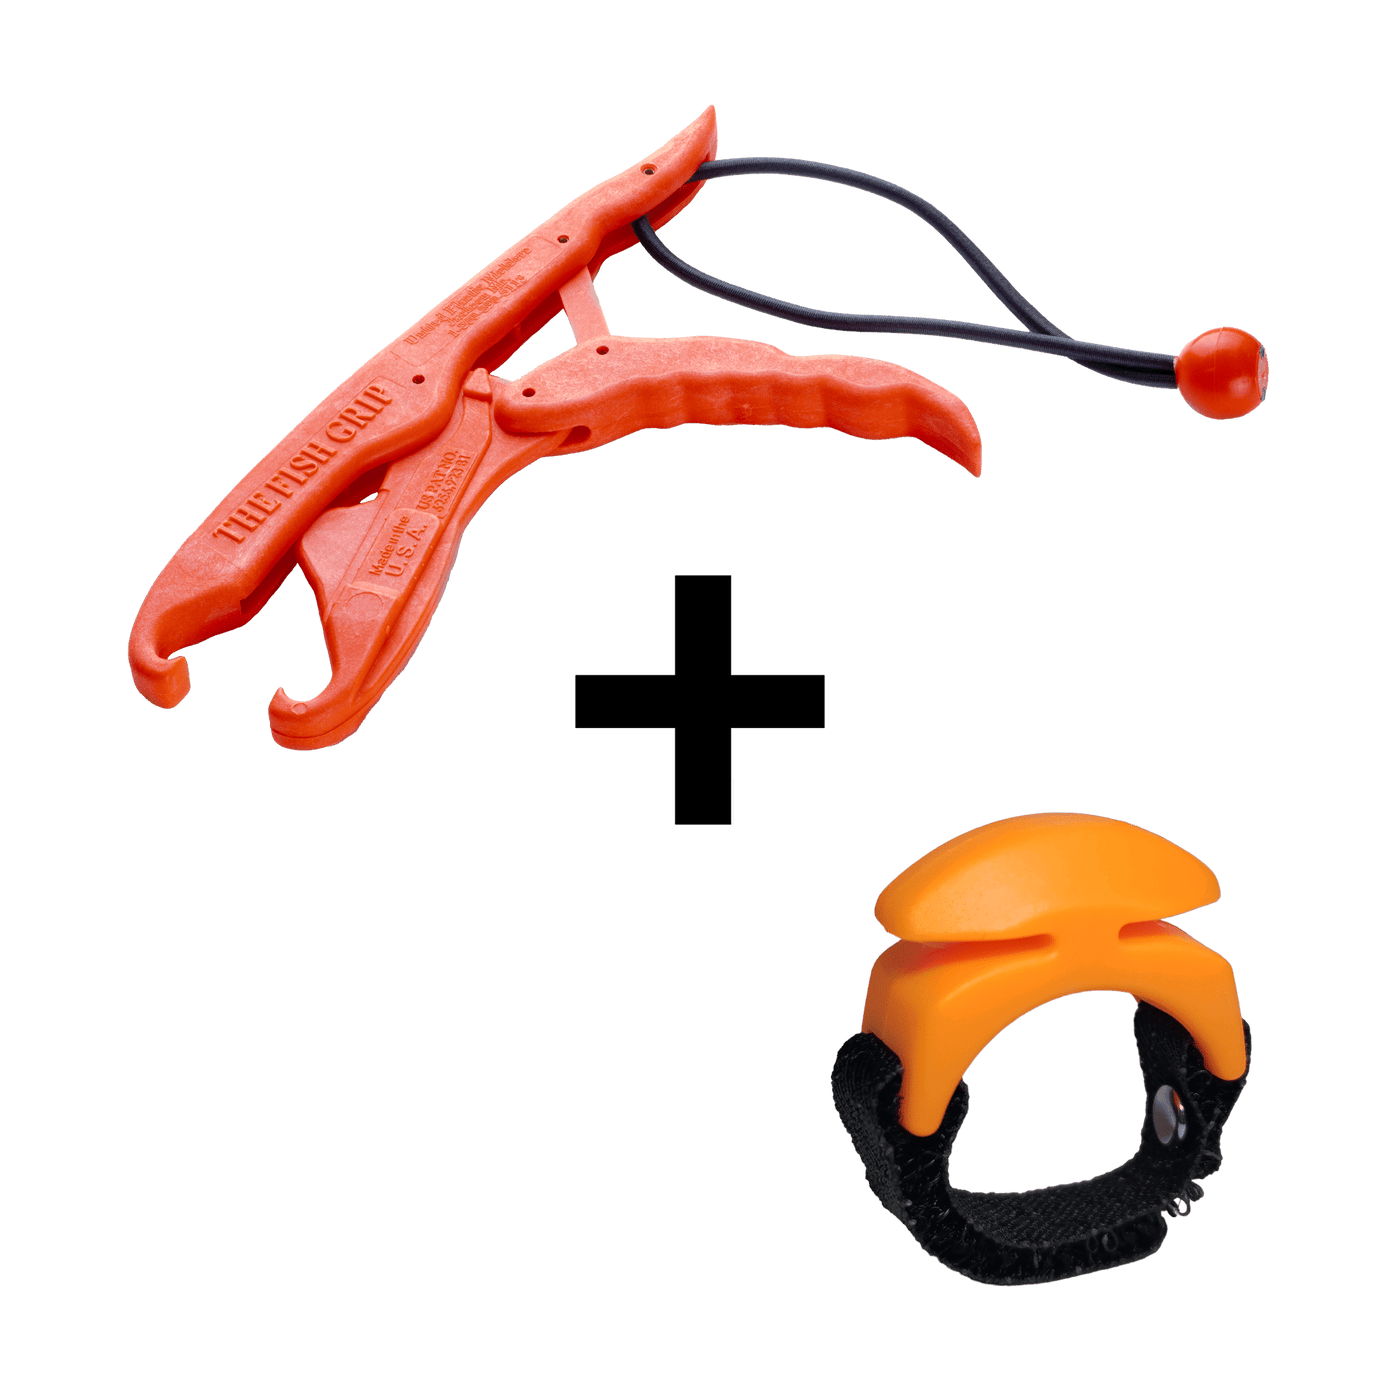 COMBO DEAL - Line Cutterz Ceramic Blade Ring + Lunker Tamers by The Fish Grip (Blaze Orange) Combo Cutter Line Cutterz 